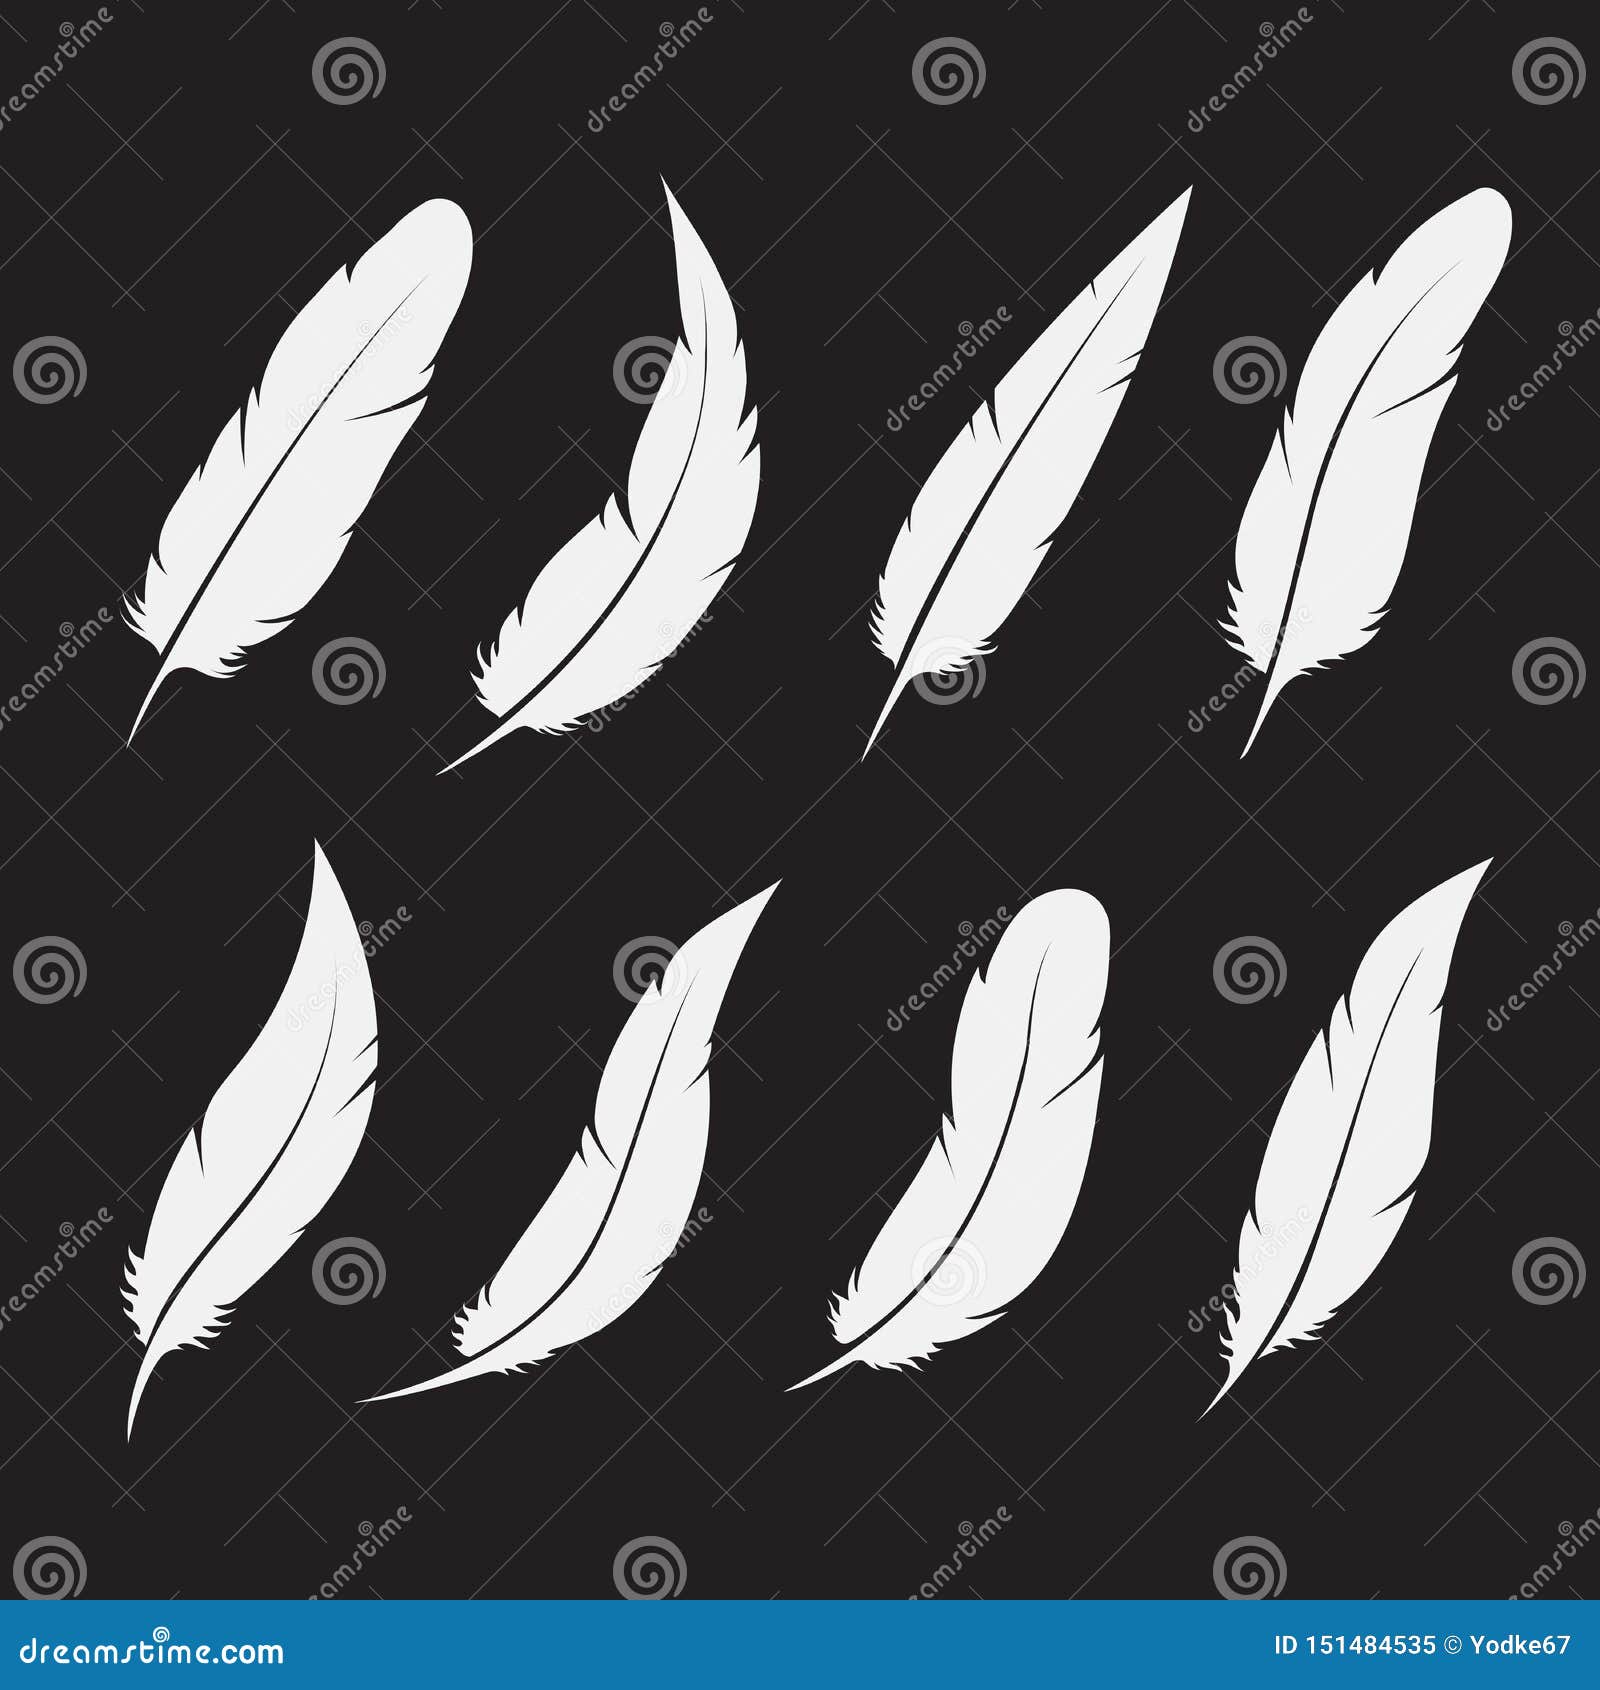 Download Vector Group Of White Feather On White Background. Easy ...